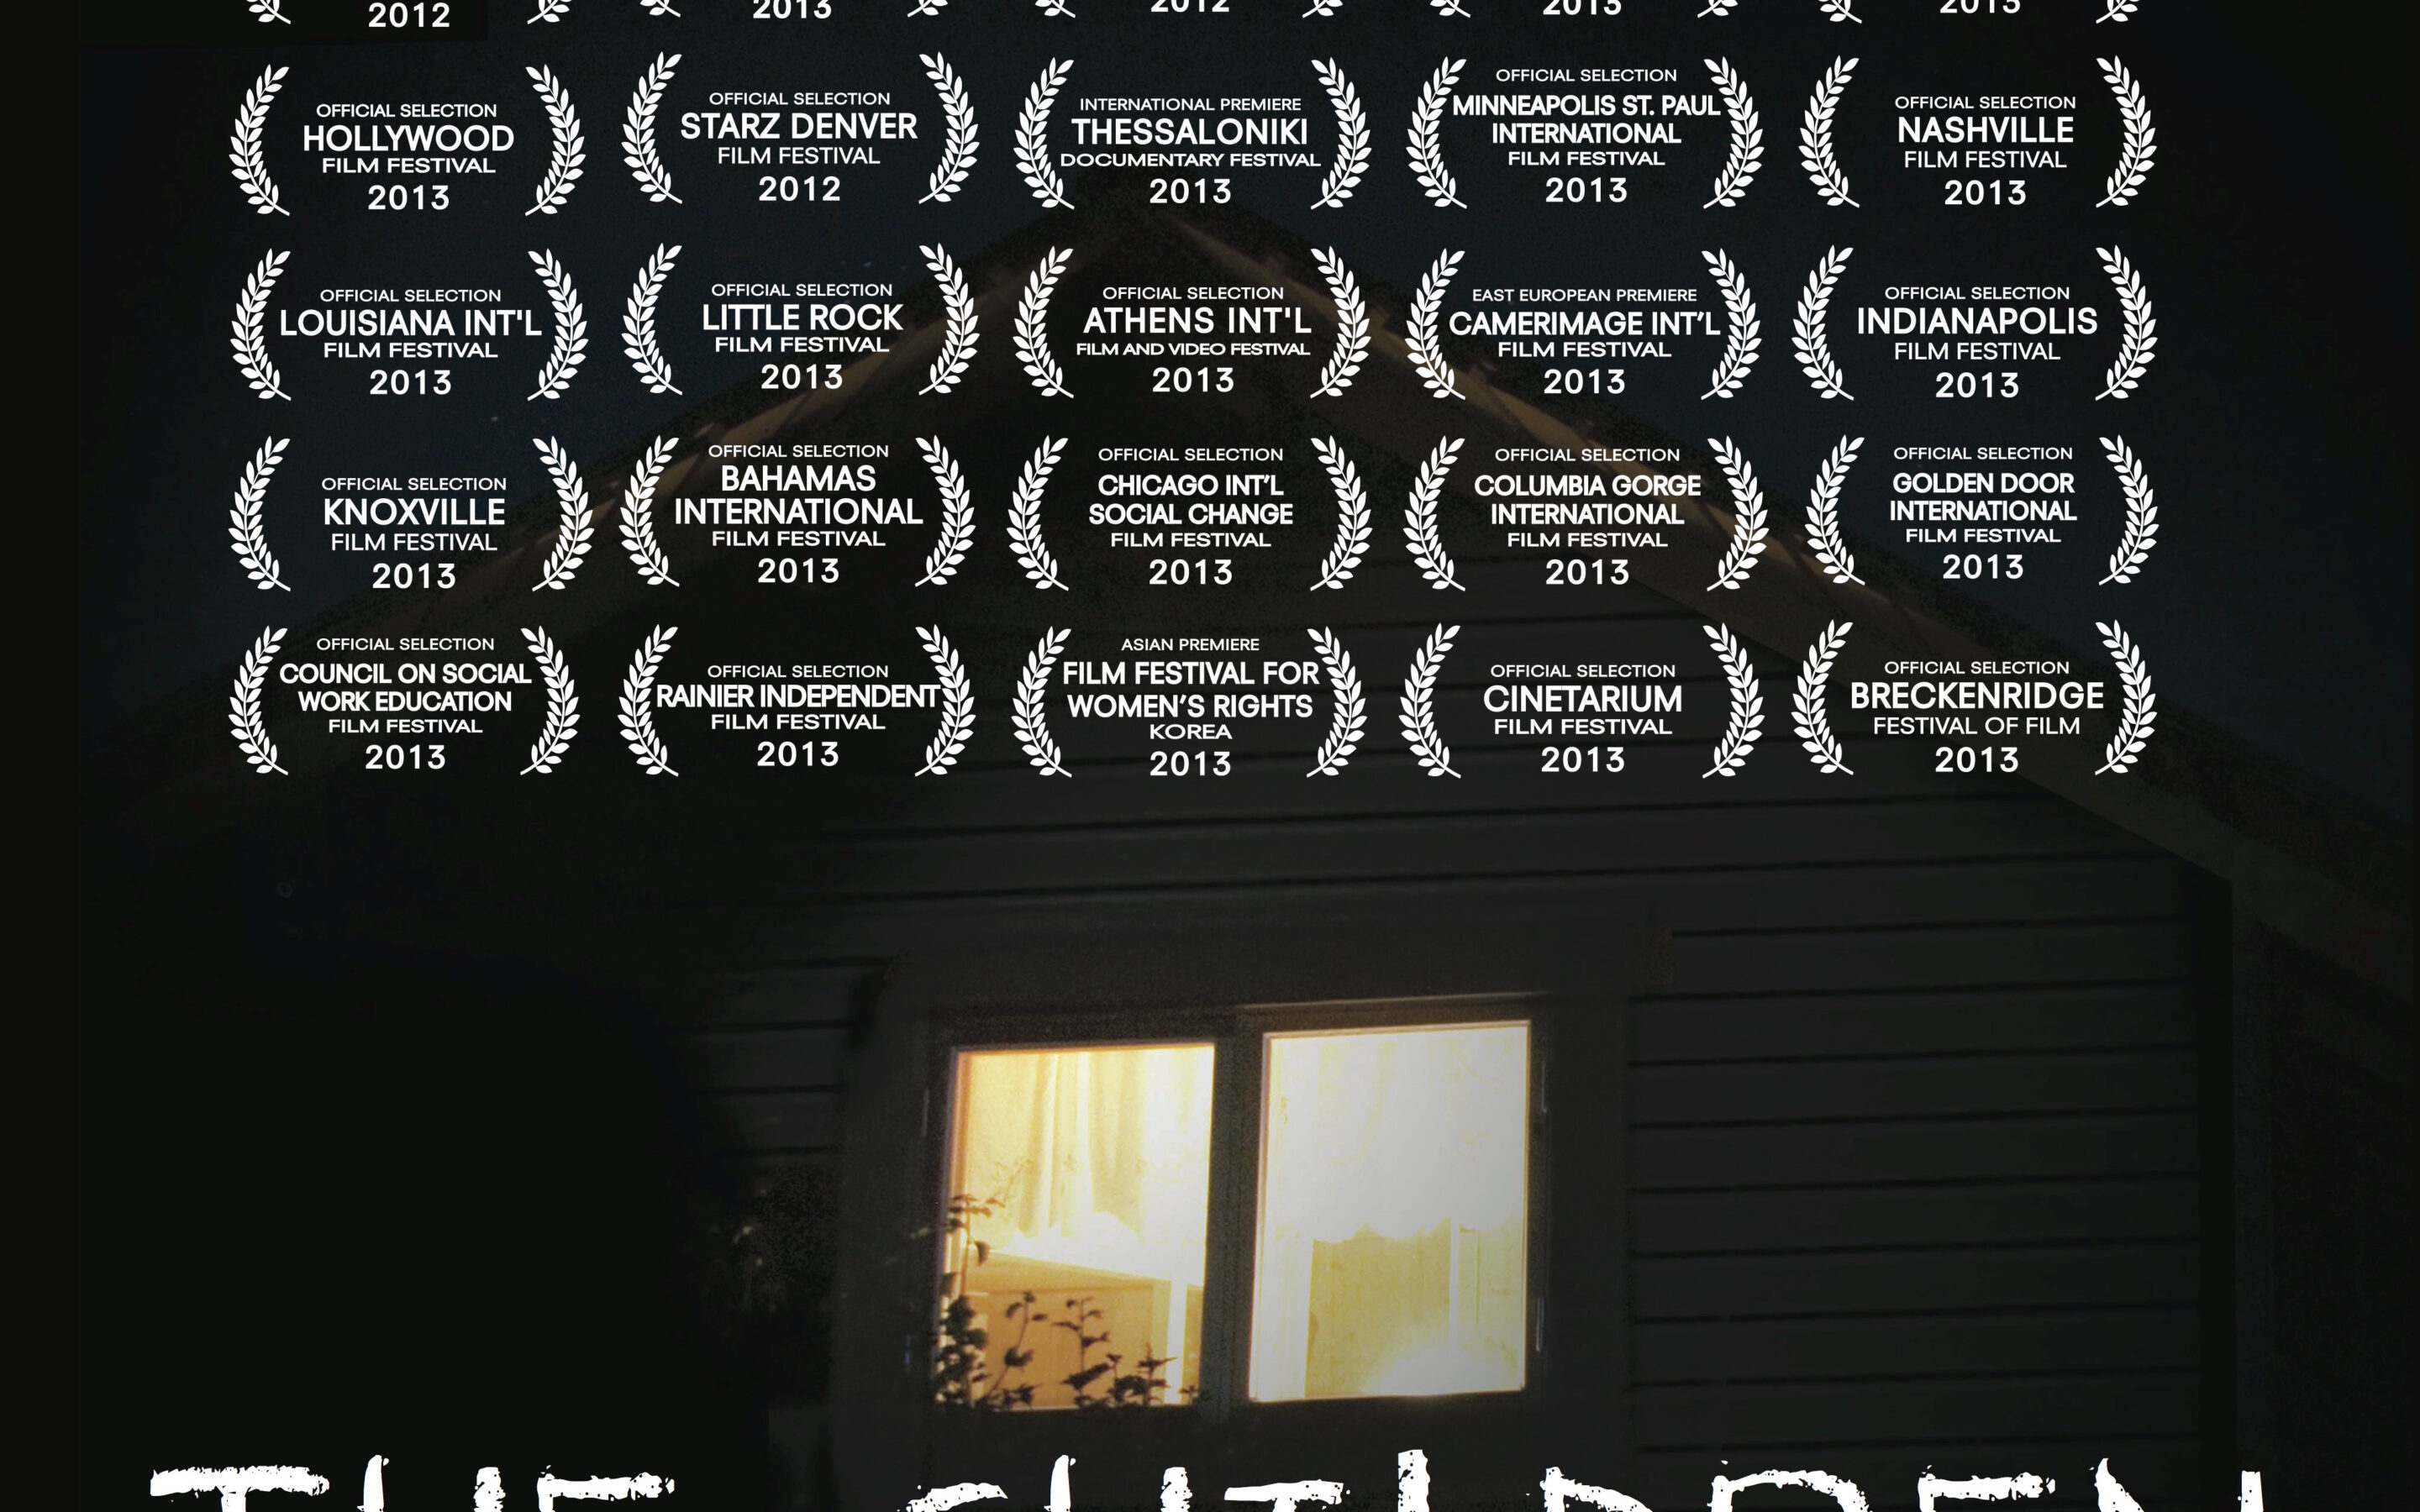 Our Landmark Documentary Short about Children of Domestic Violence Winner at DOC NYC film festival!